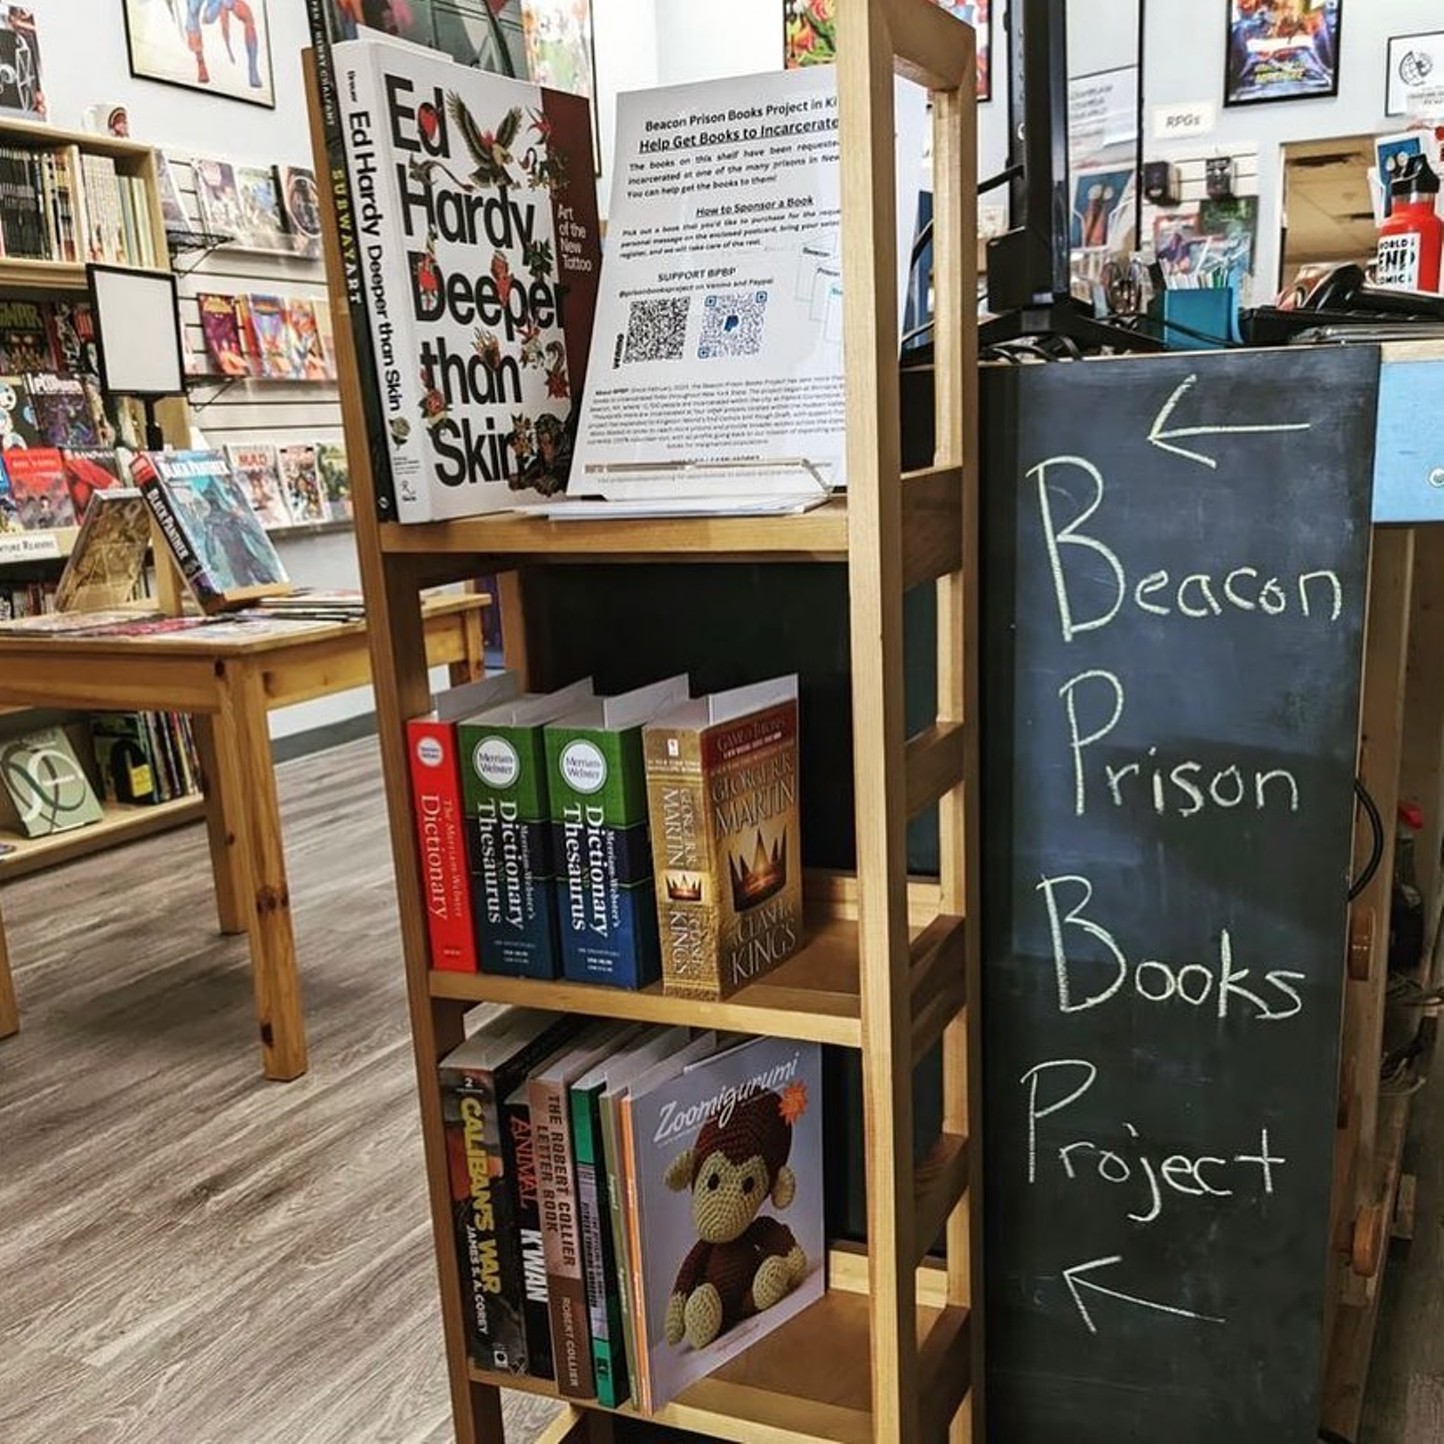 The Beacon Jail Books Mission Supplies Free Books to These Behind Bars